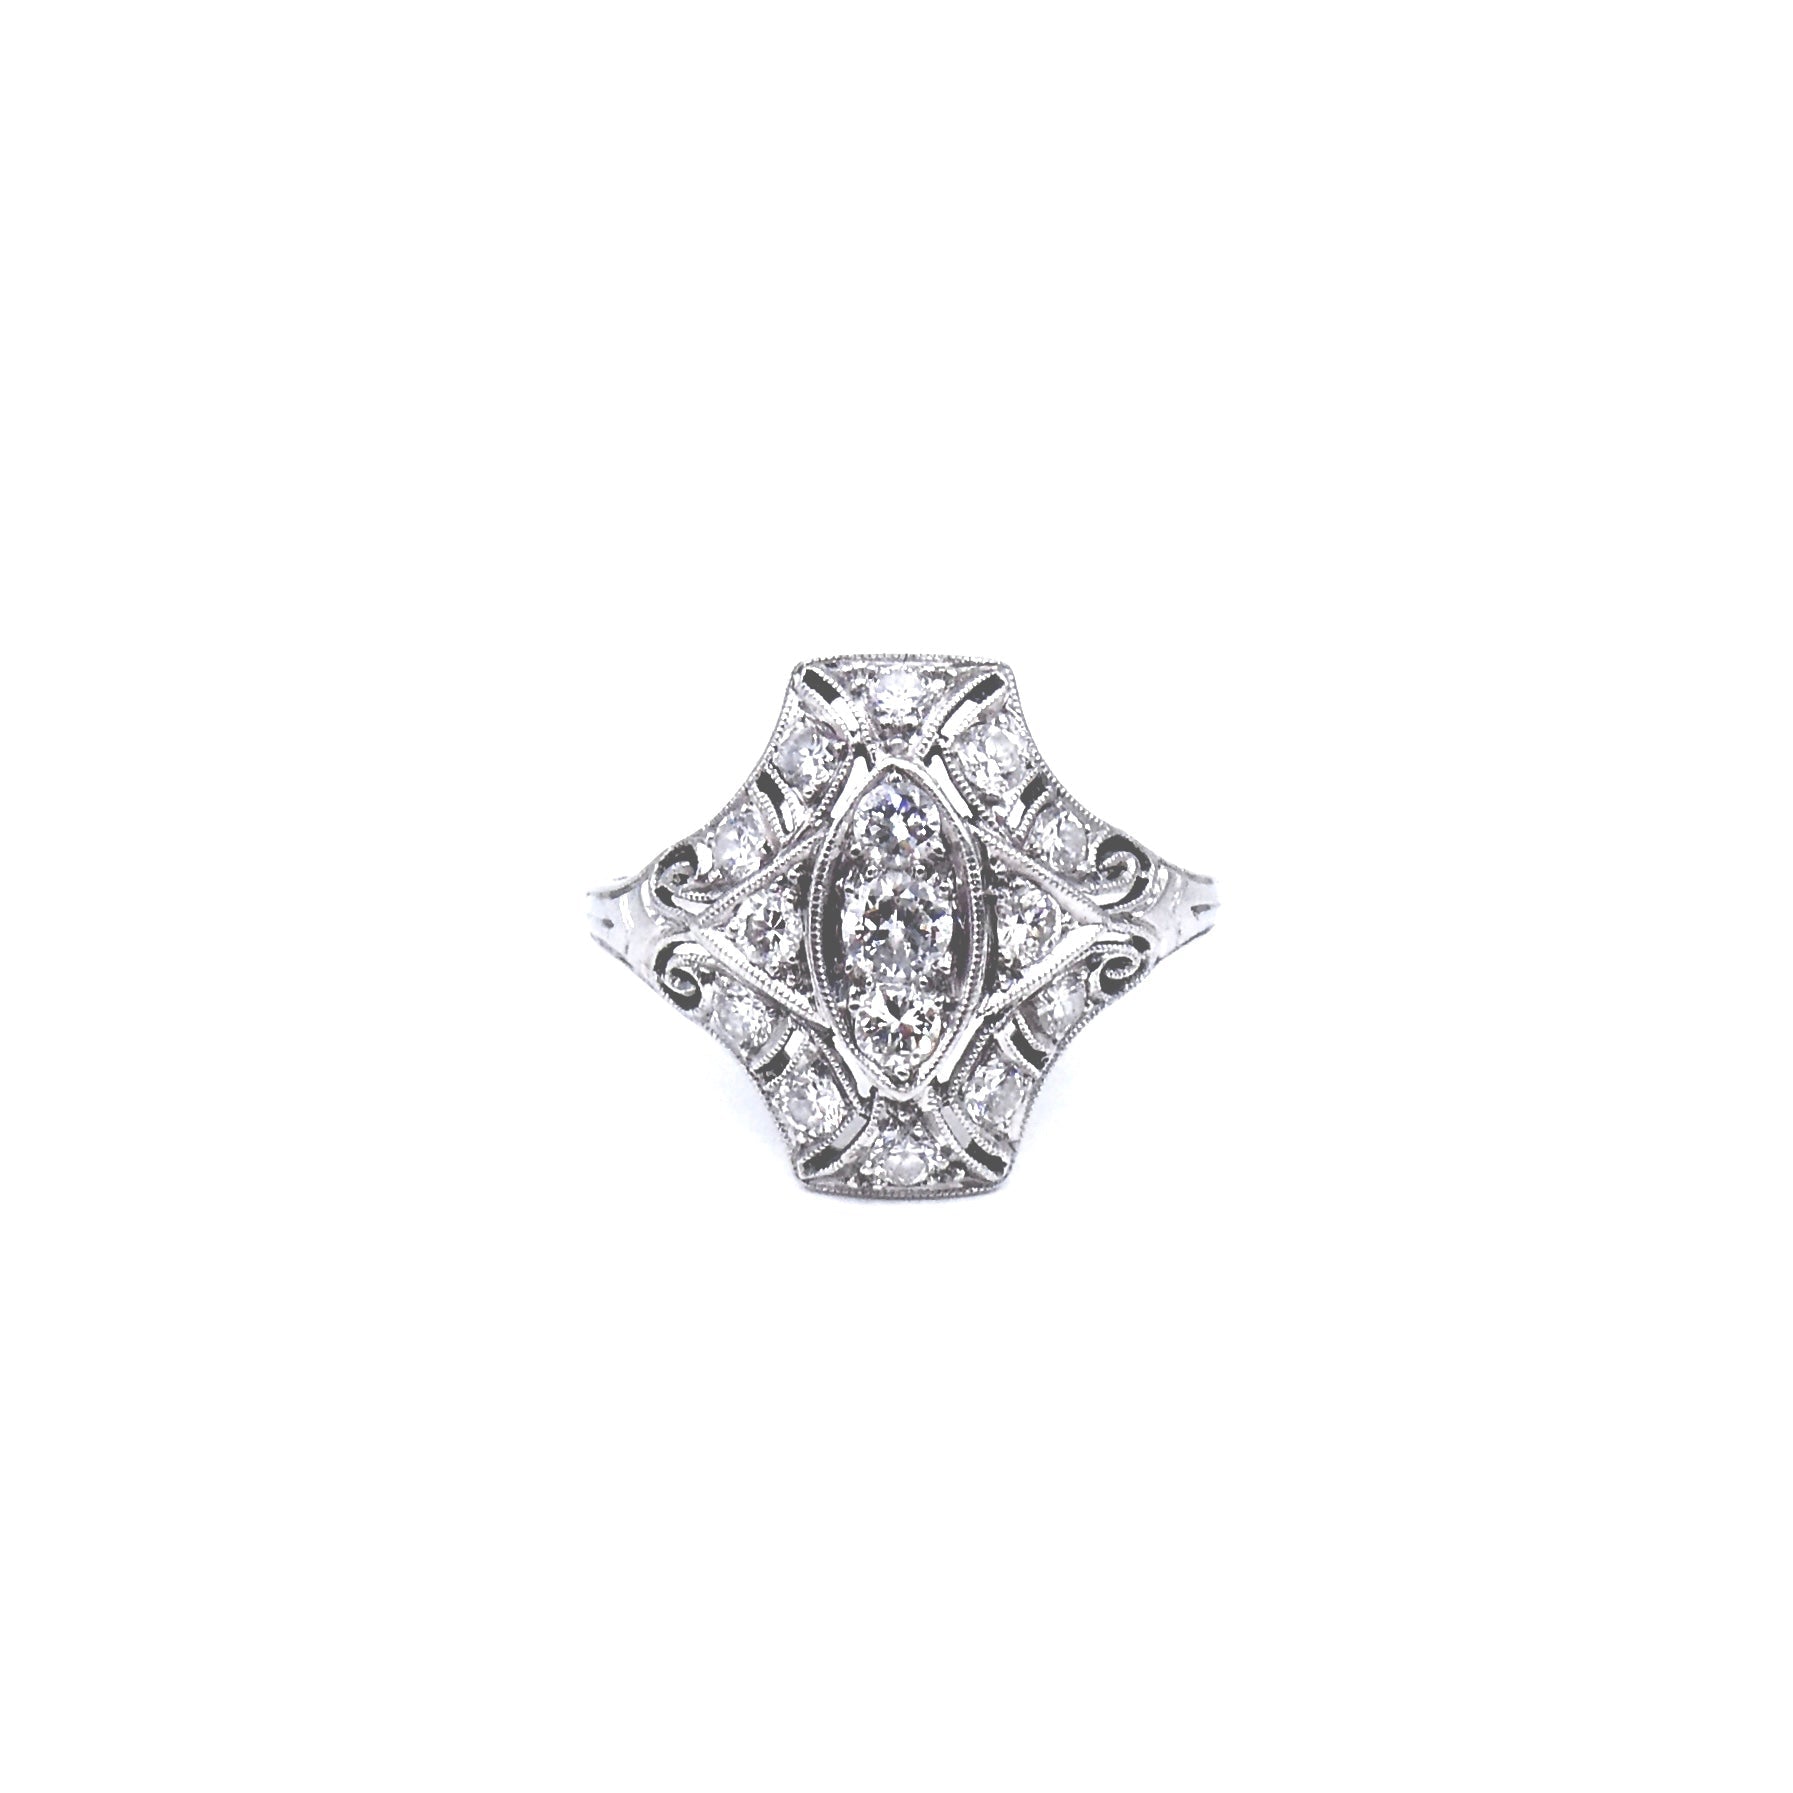 Art Deco diamond ring, with curved lines and a pierced setting. - Collected